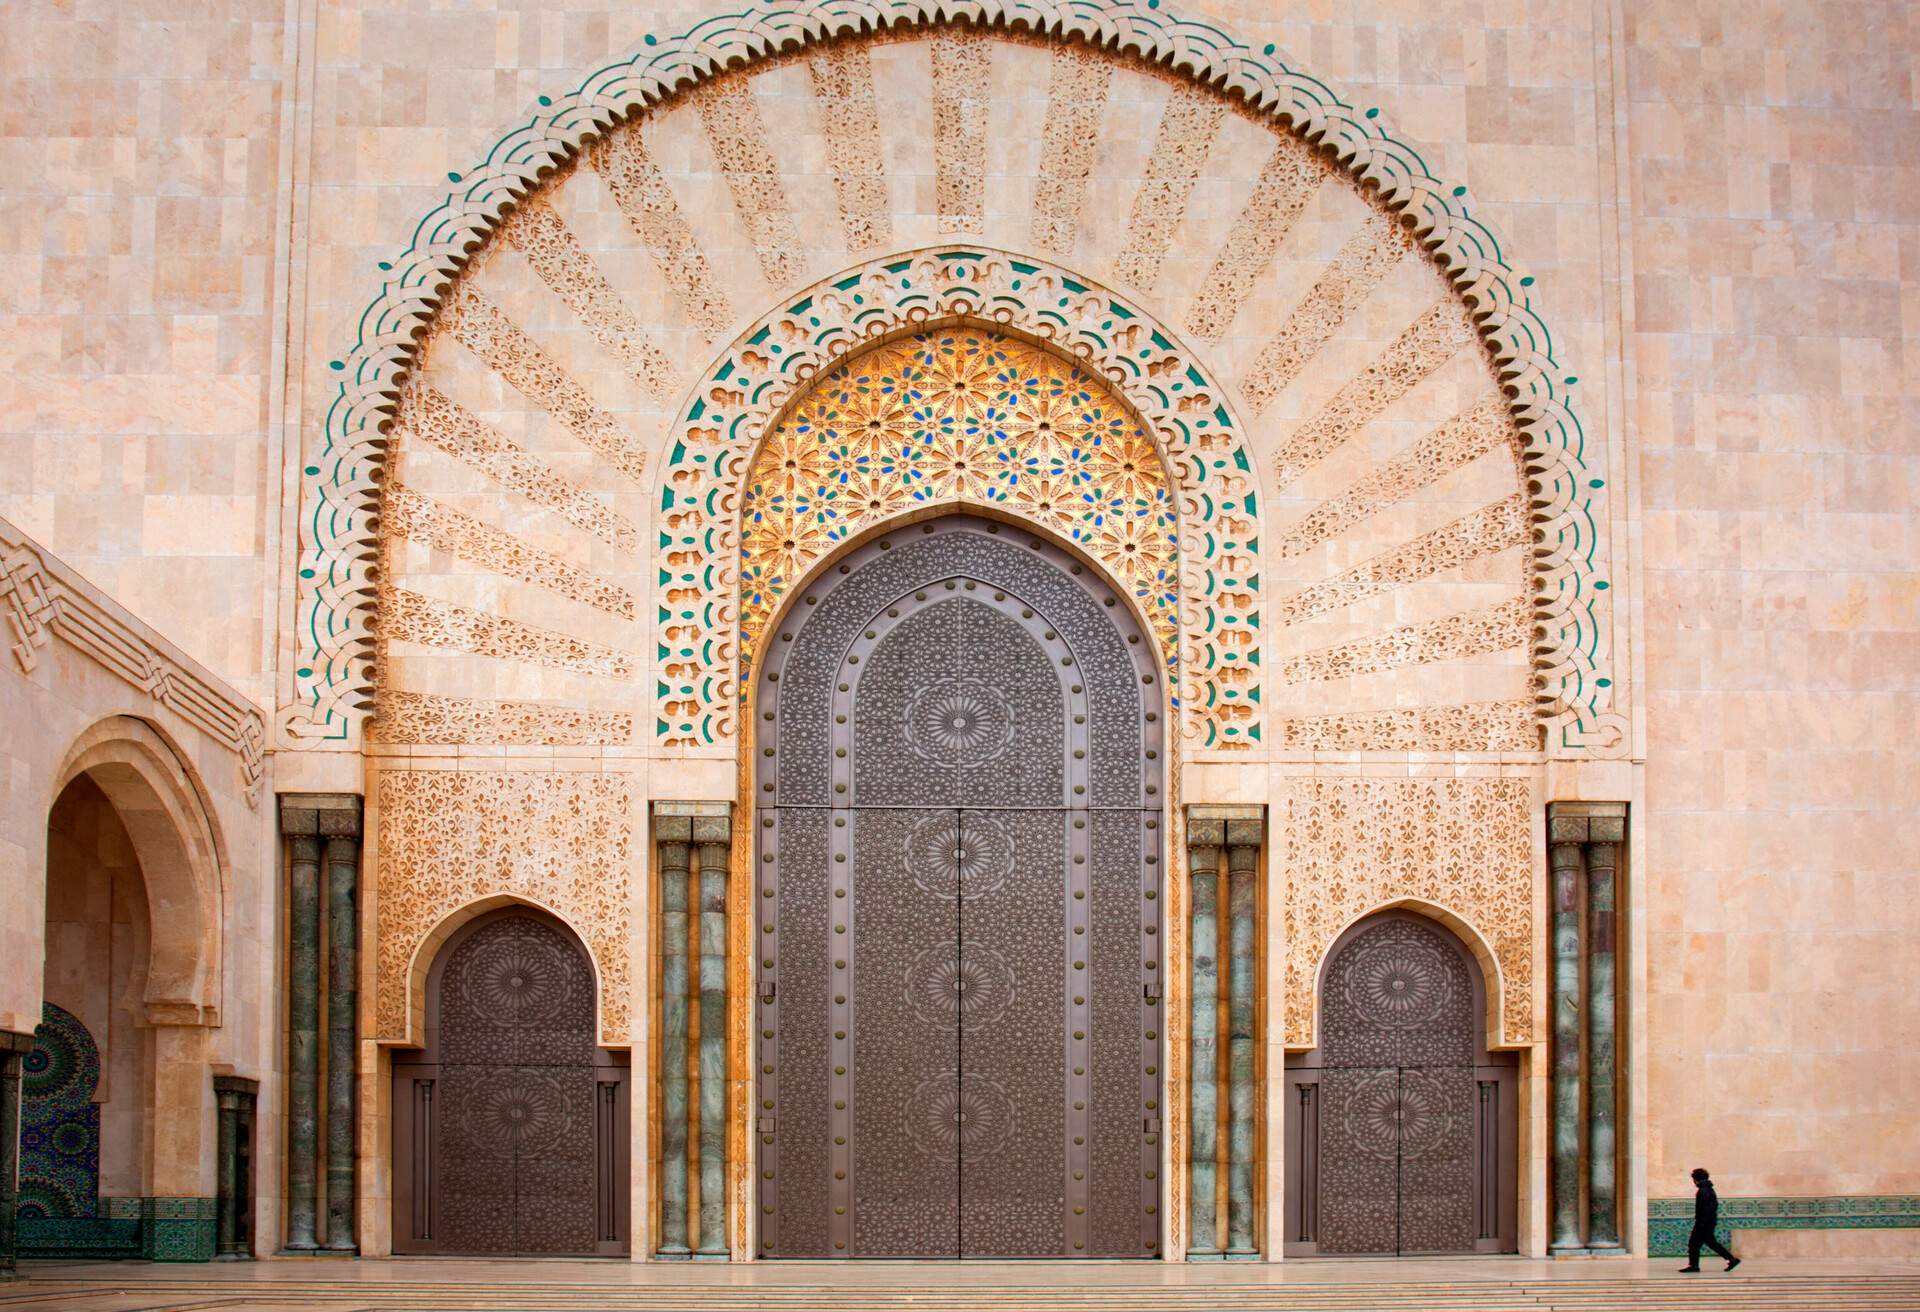 Morocco, Casablanca, Hassan II mosque, side entrance of main mosque. small man wlaking for scale . huge entrance doorway.